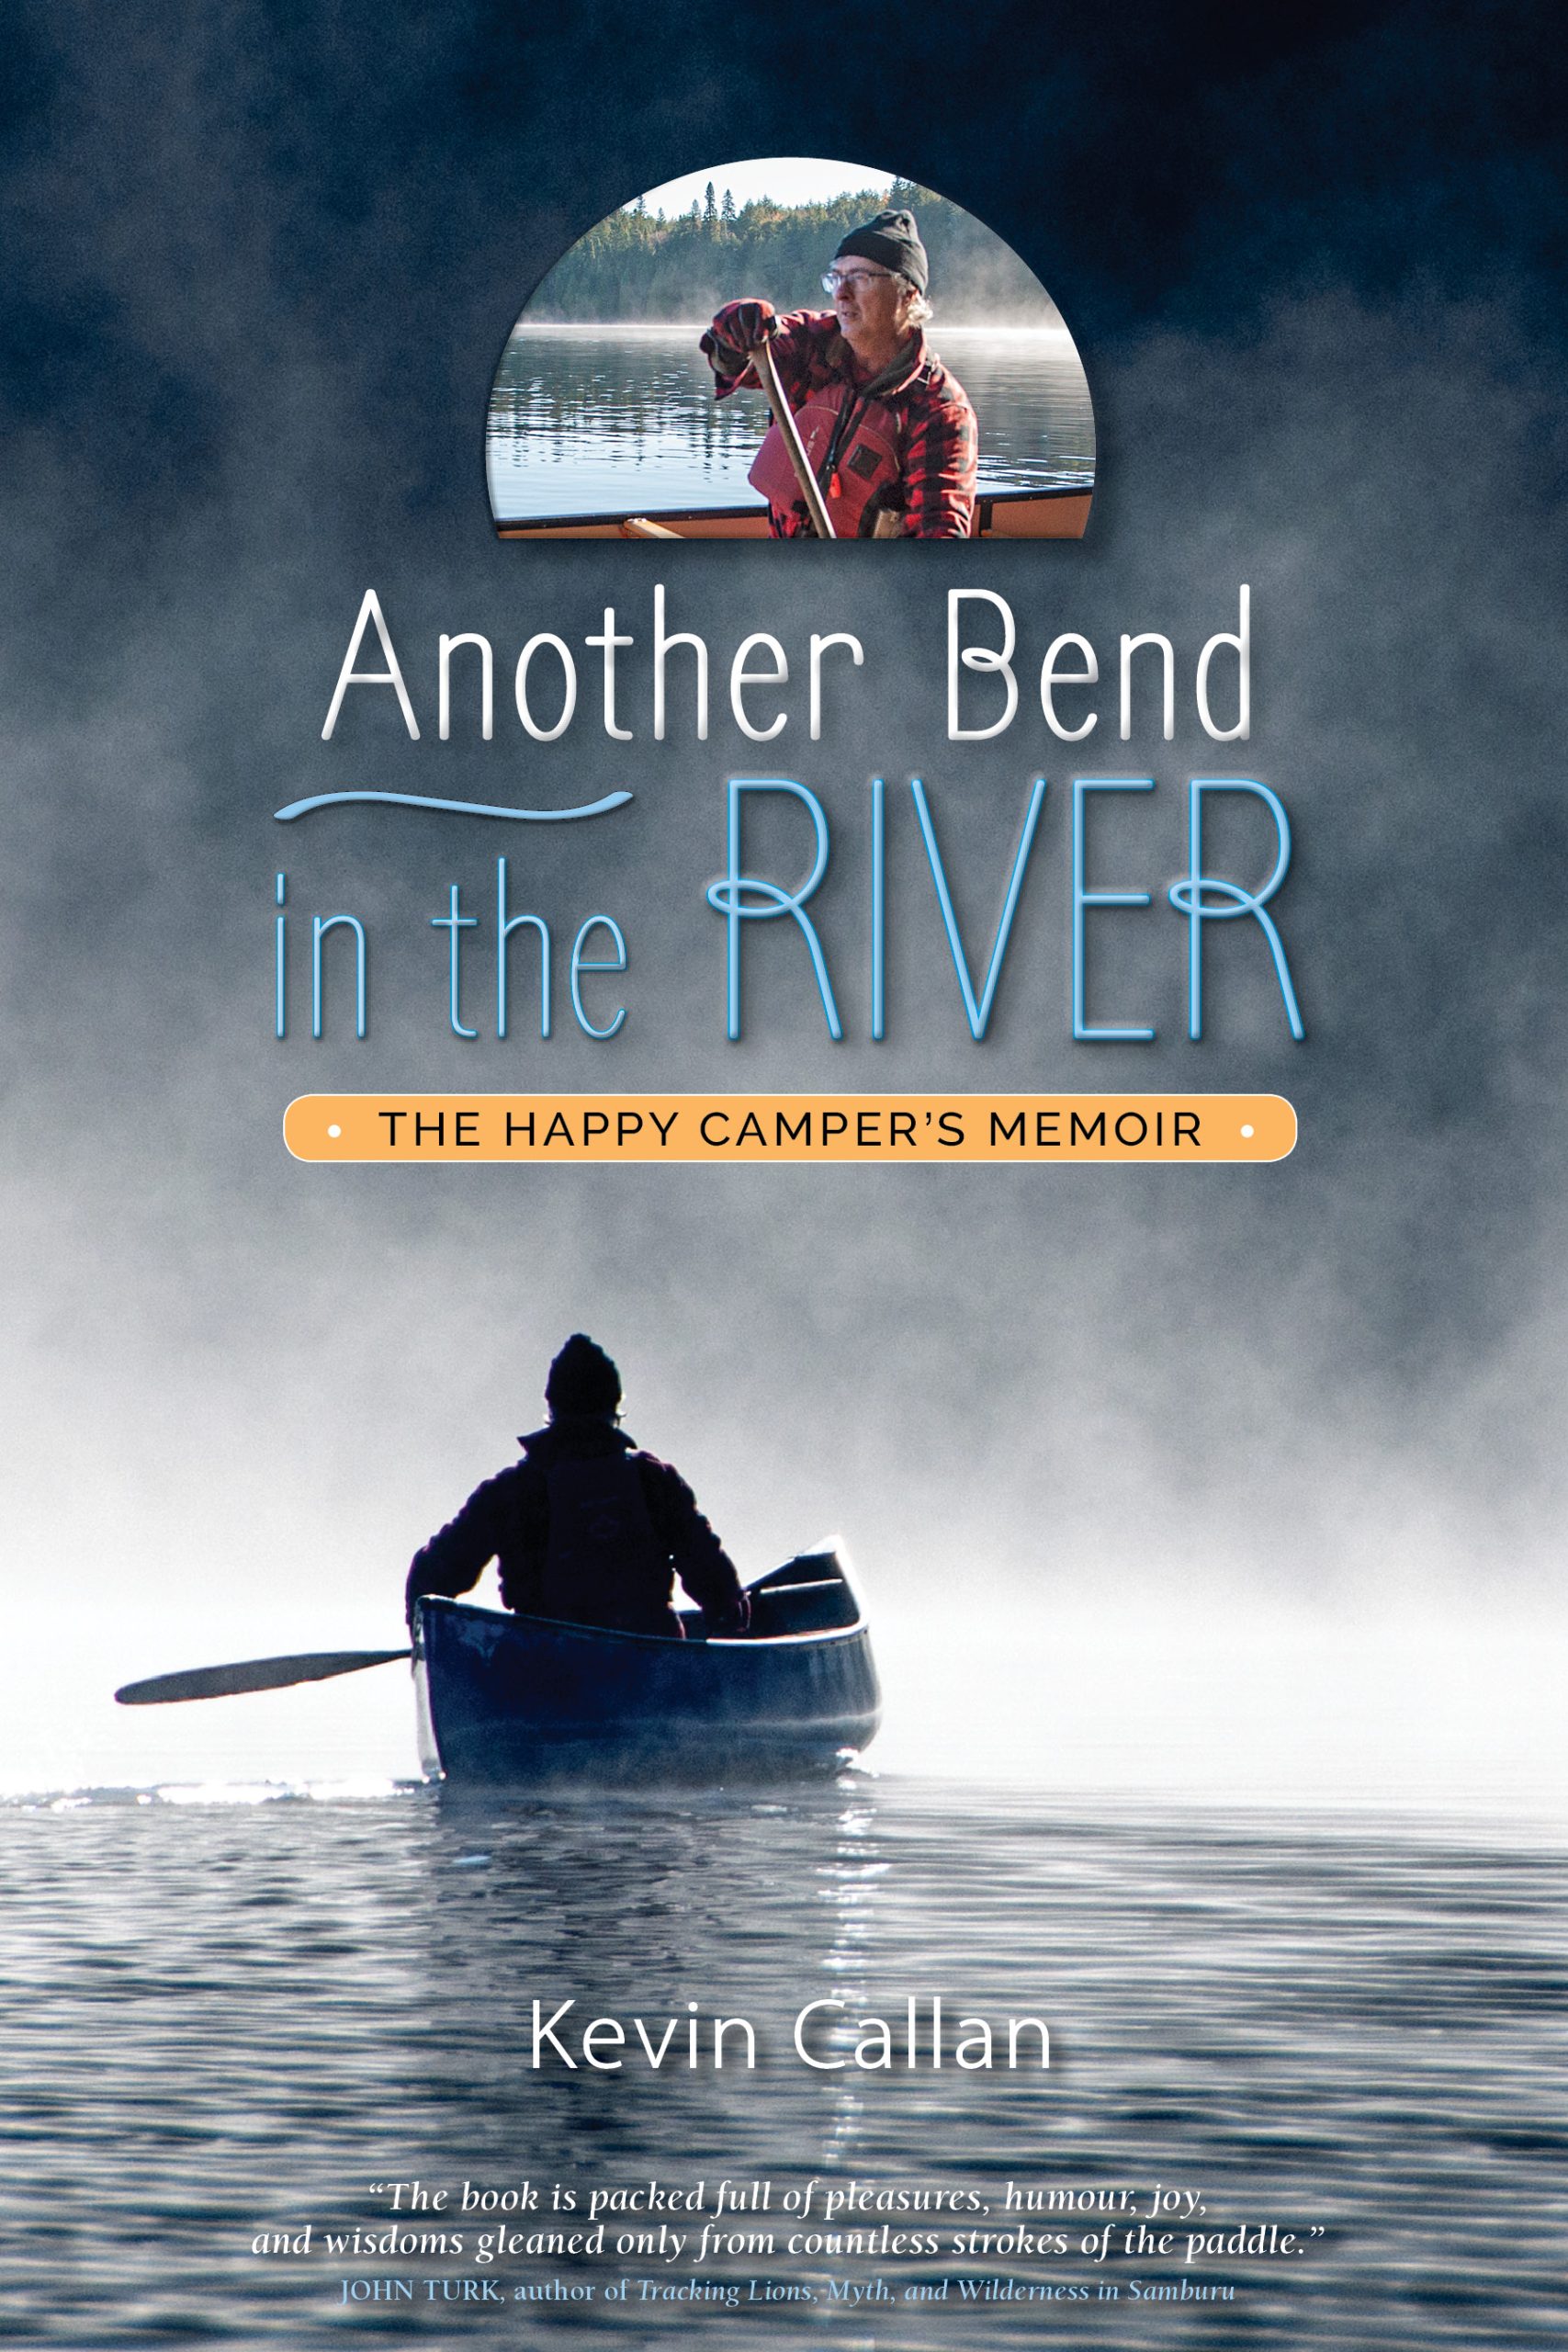 Another Bend in the River - The Happy Camper's Memoir by Kevin Callan